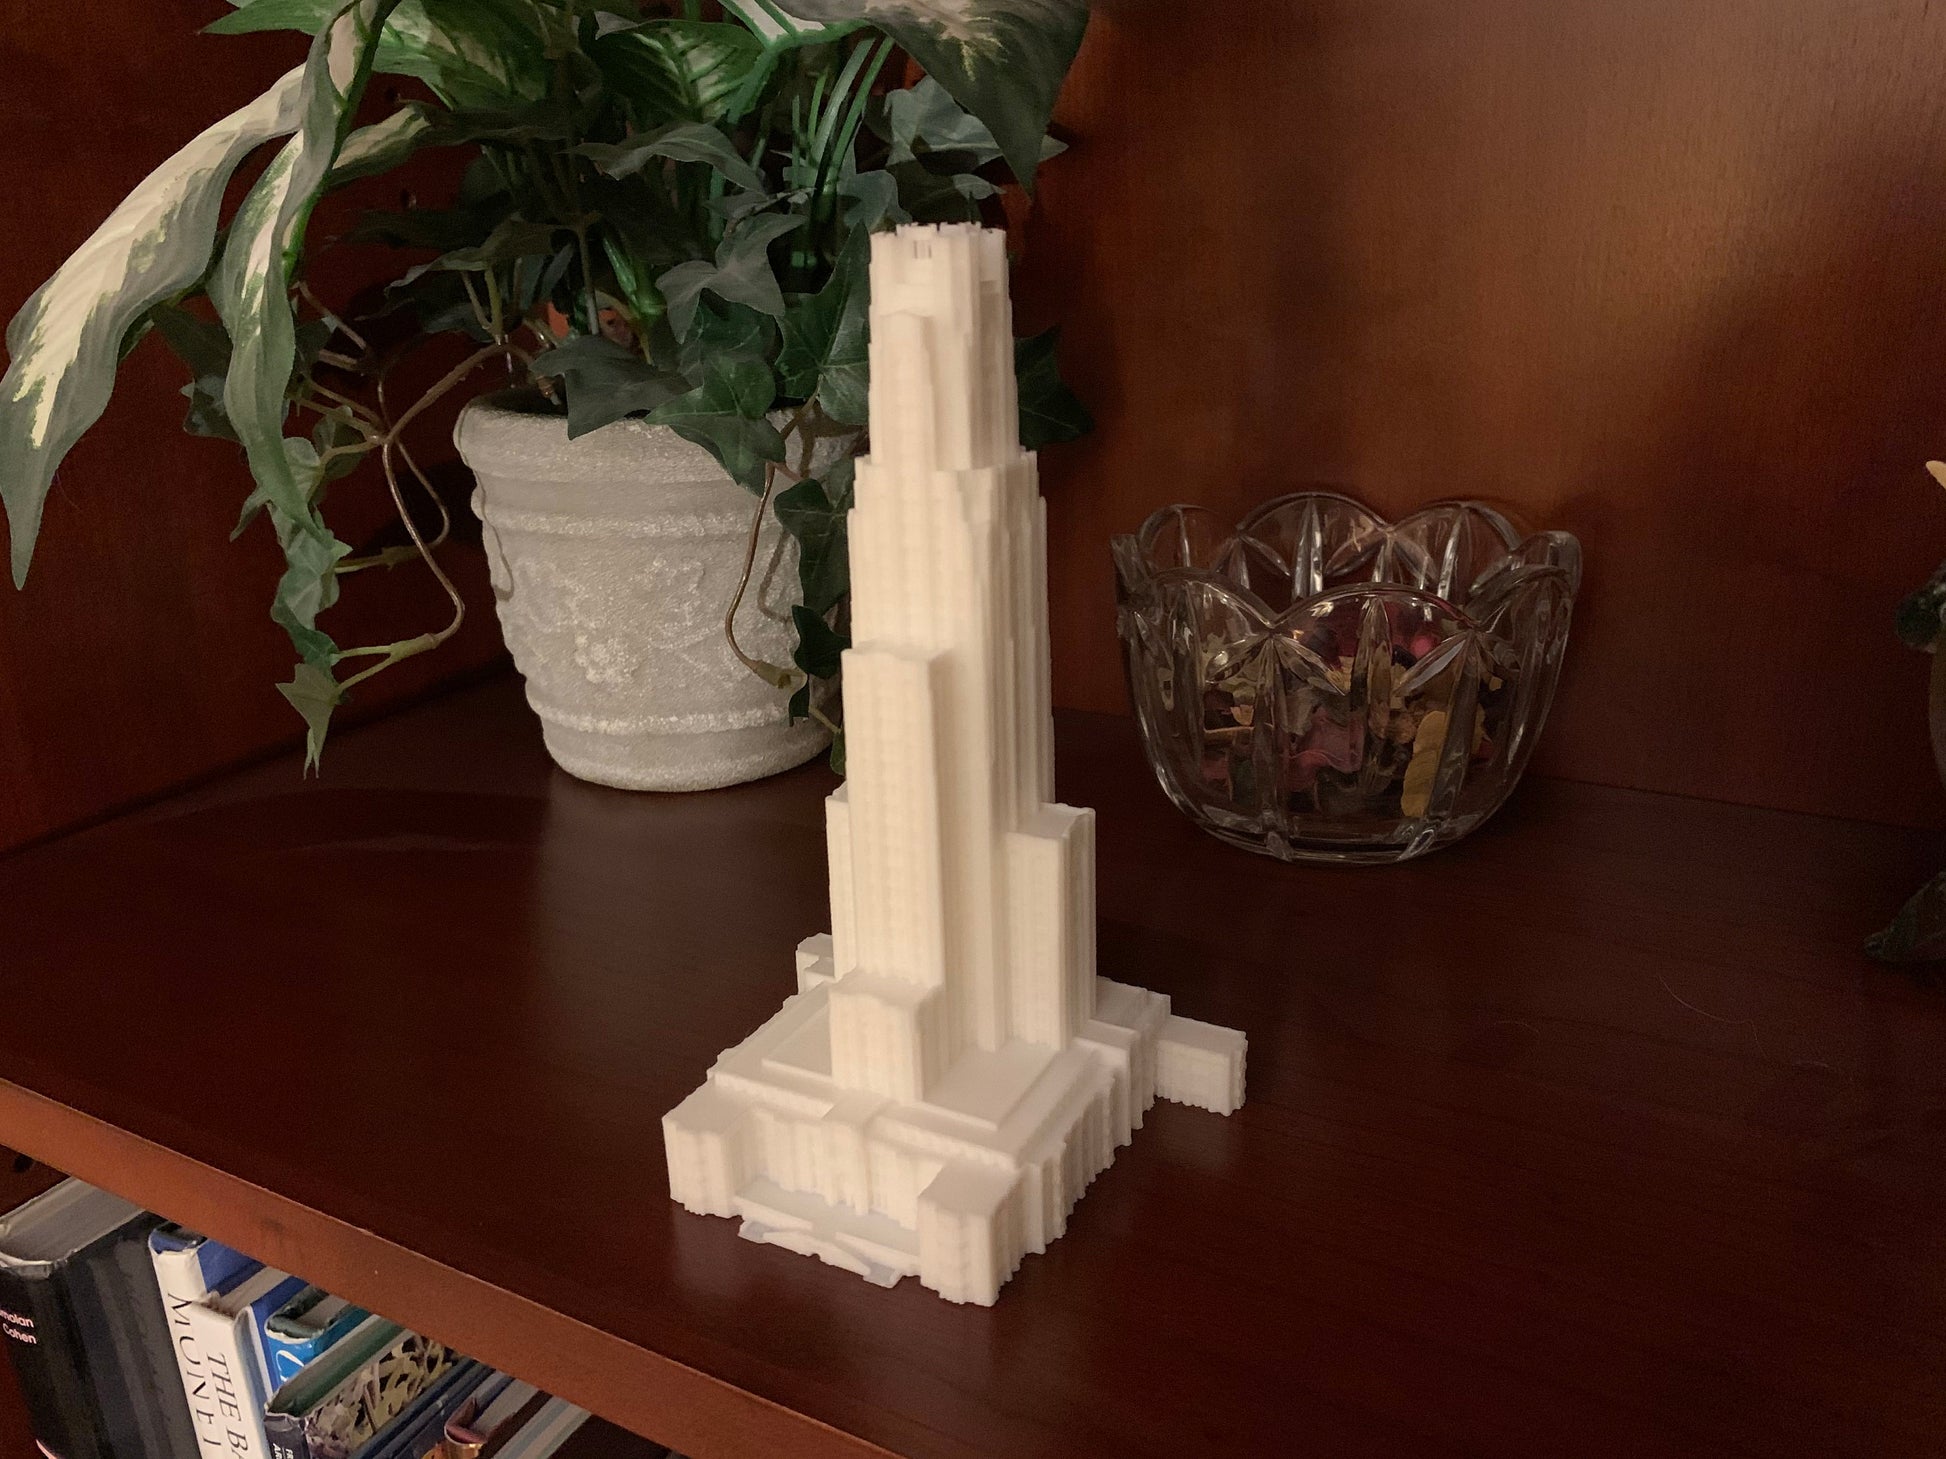 Cathedral of Learning Model- 3D Printed